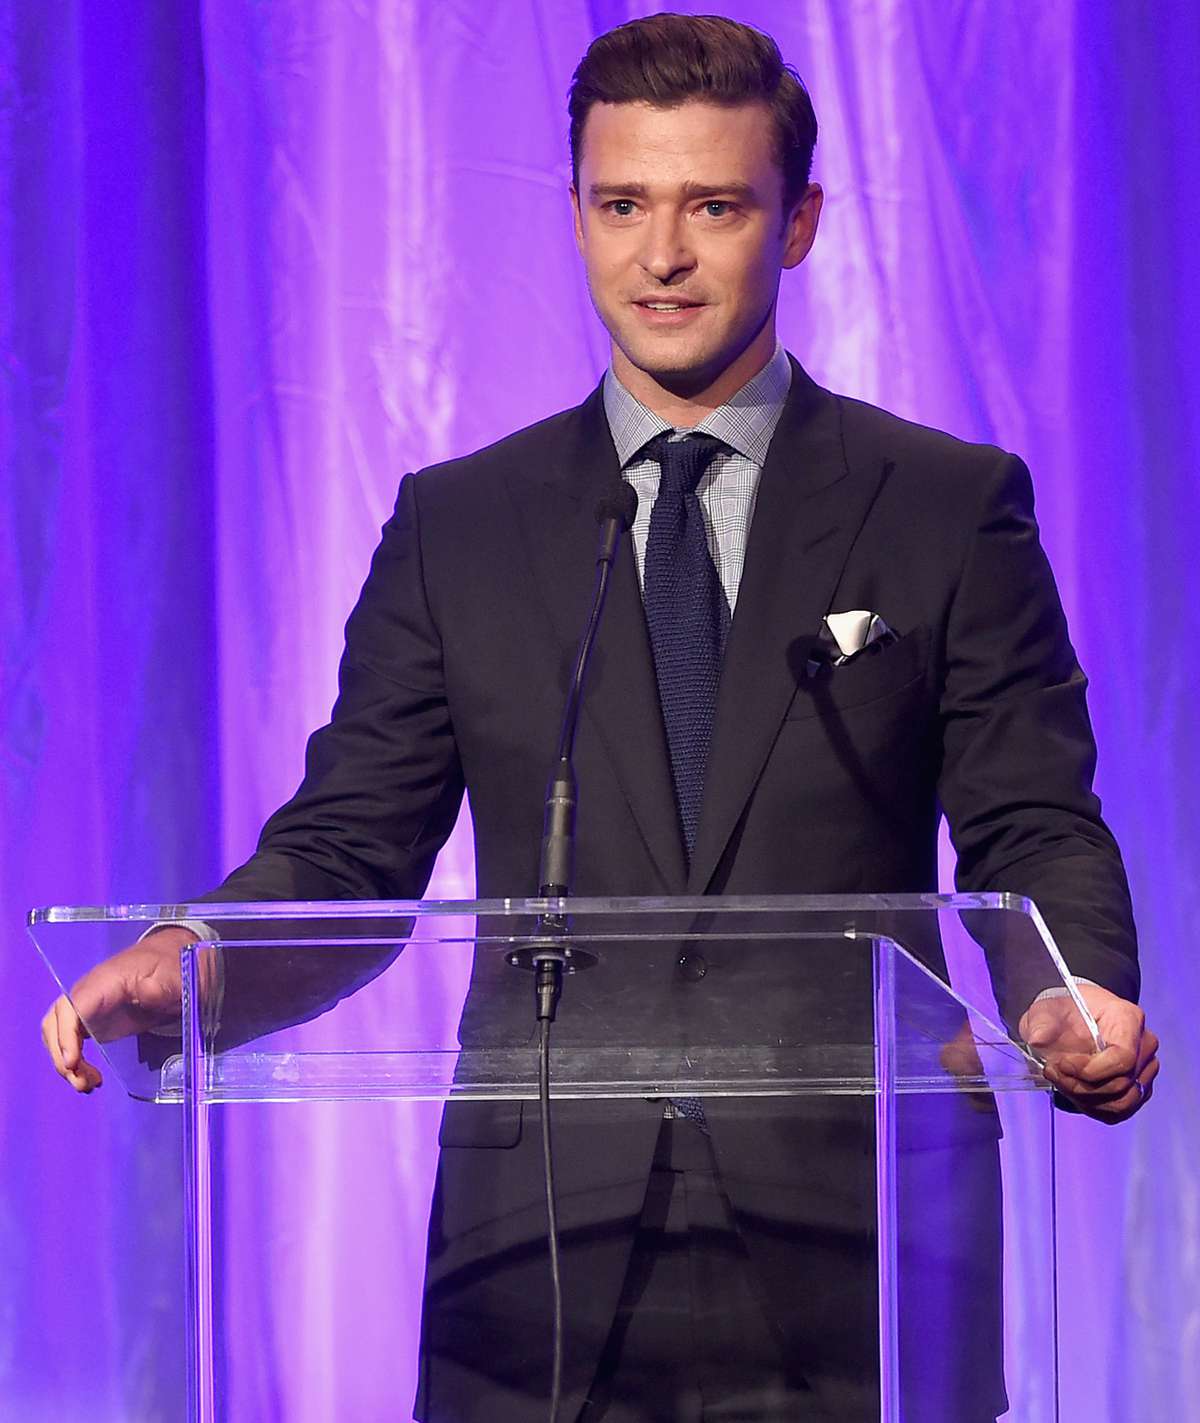 speaks onstage at the Hollywood Foreign Press Association's Grants Banquet at the Beverly Wilshire Four Seasons Hotel on August 4, 2016 in Beverly Hills, California.